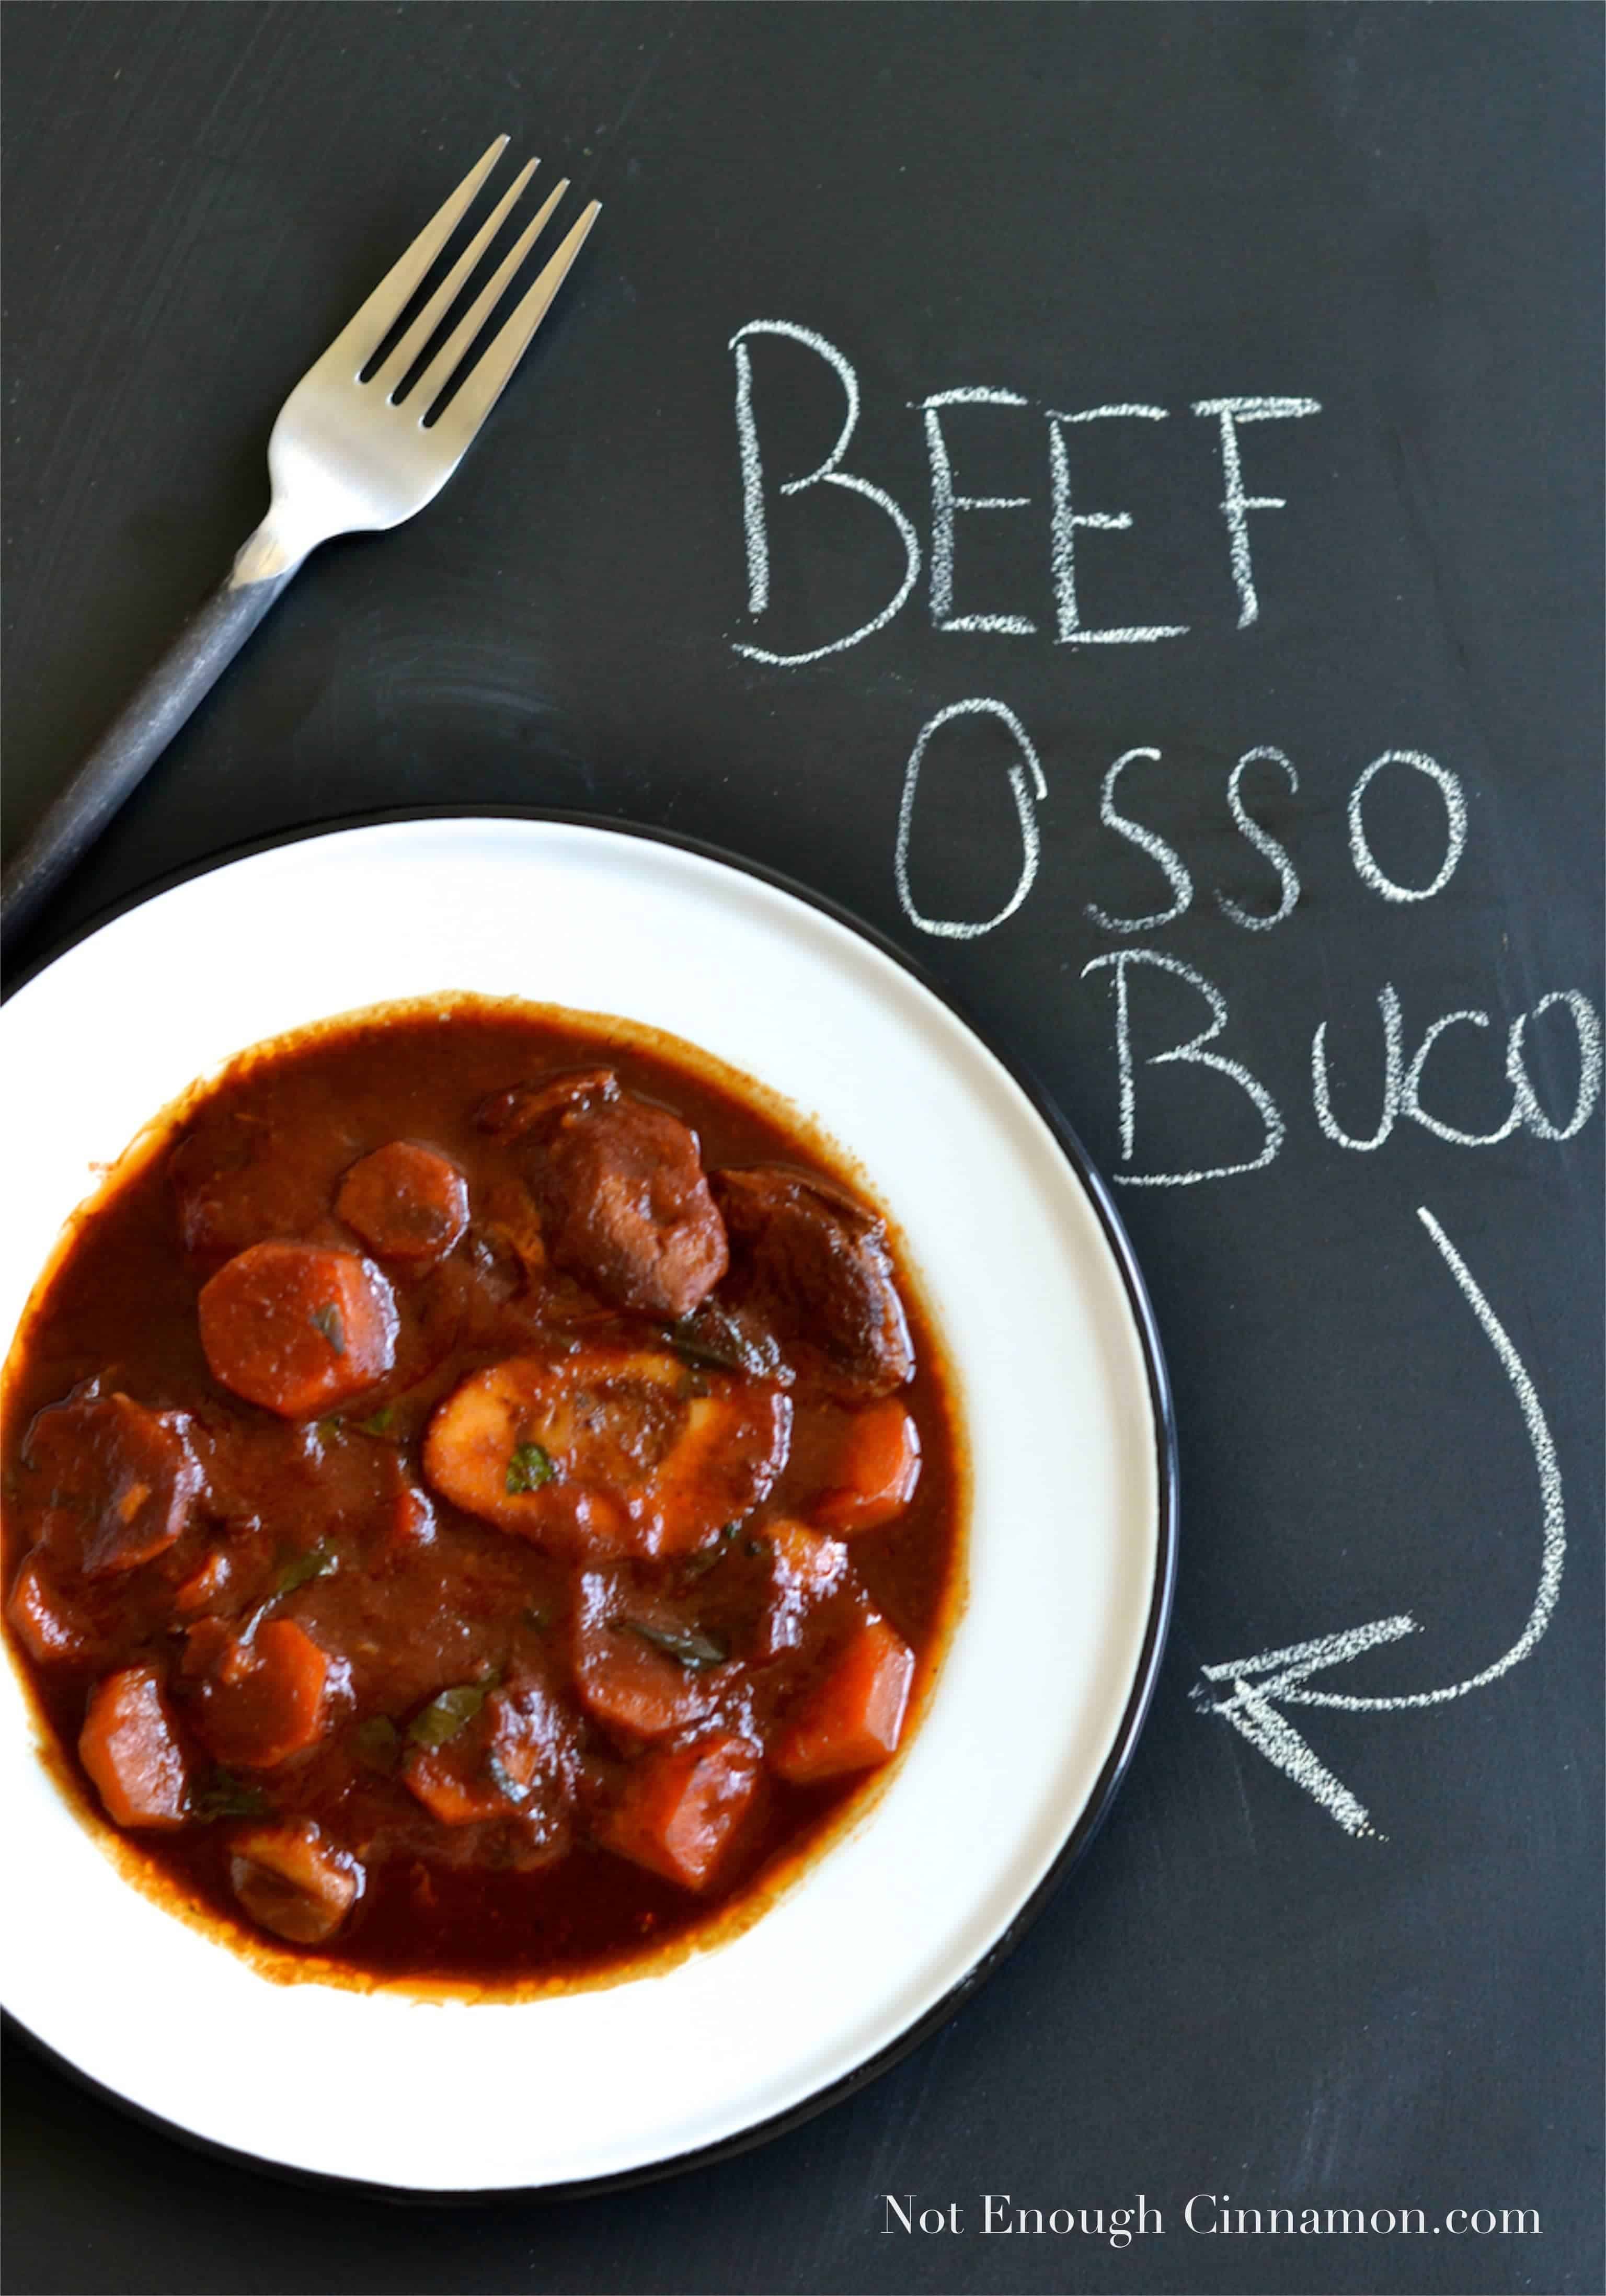 My easy Slow Cooker Beef Osso Bucco comes with a thick, savory tomato sauce and chunks of tender, slow-cooked vegetables! Treat yourself and your guests to elegant Italian comfort food at its best, without any stress and little prep work!